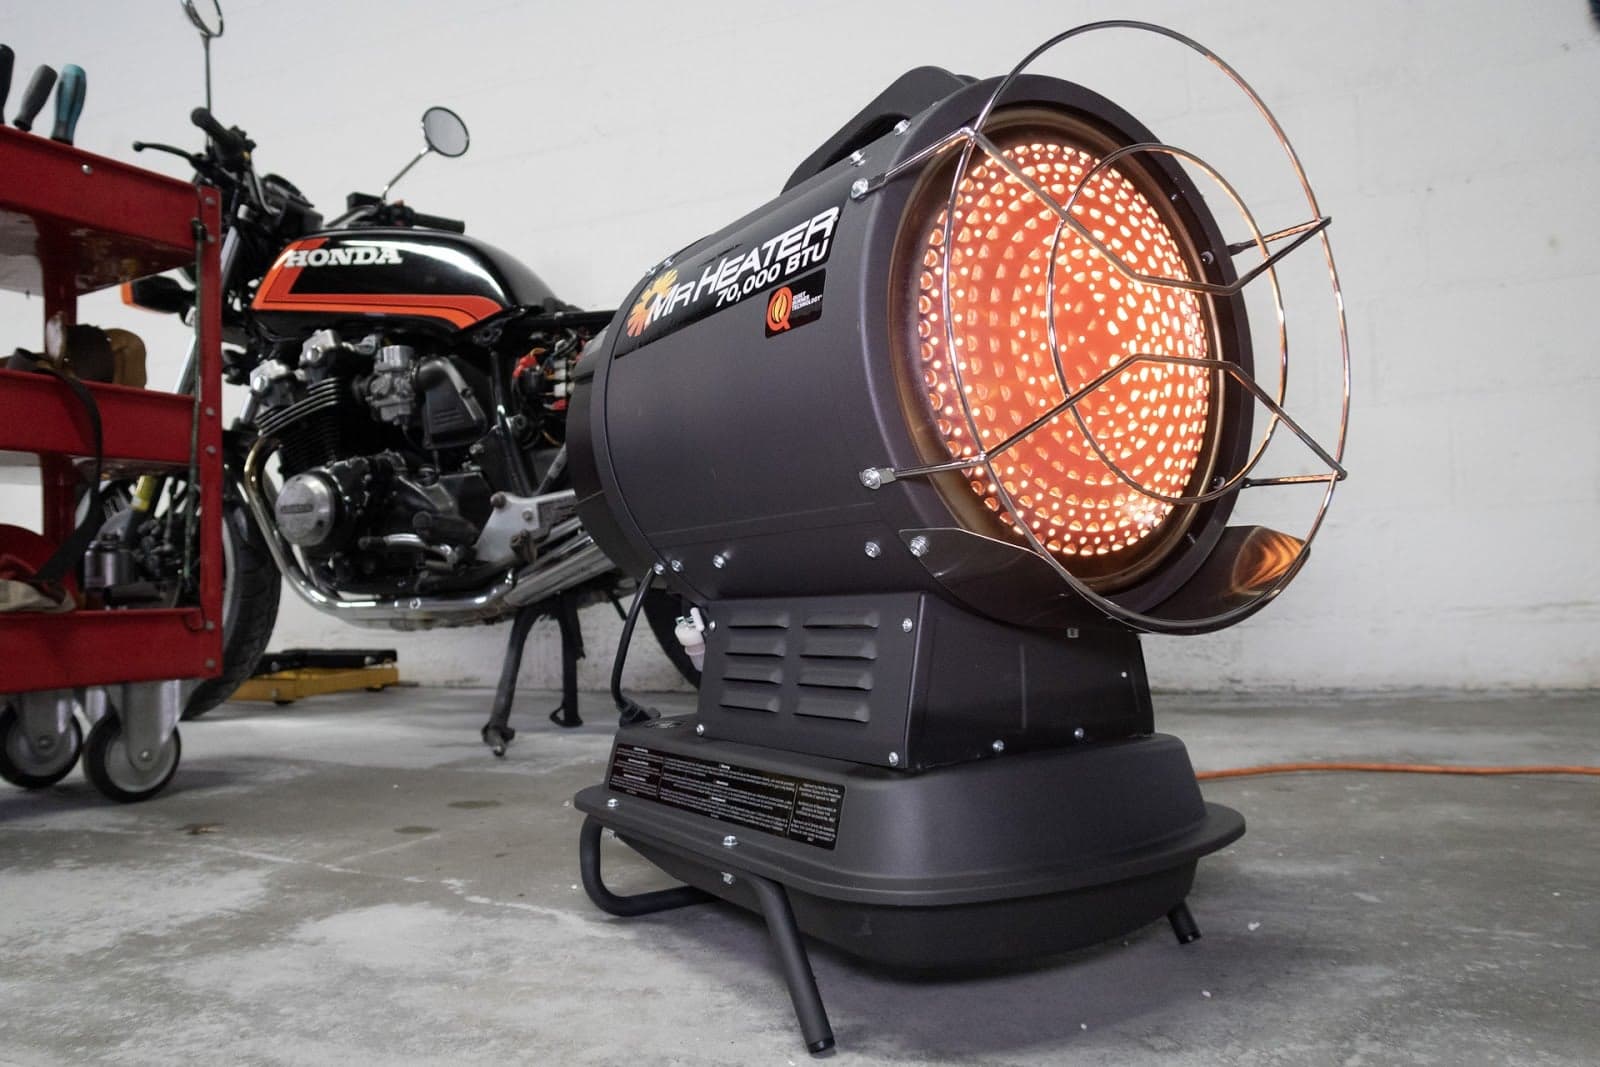 Hands-On Review: The Best Garage Heaters to Let You Wrench All Winter